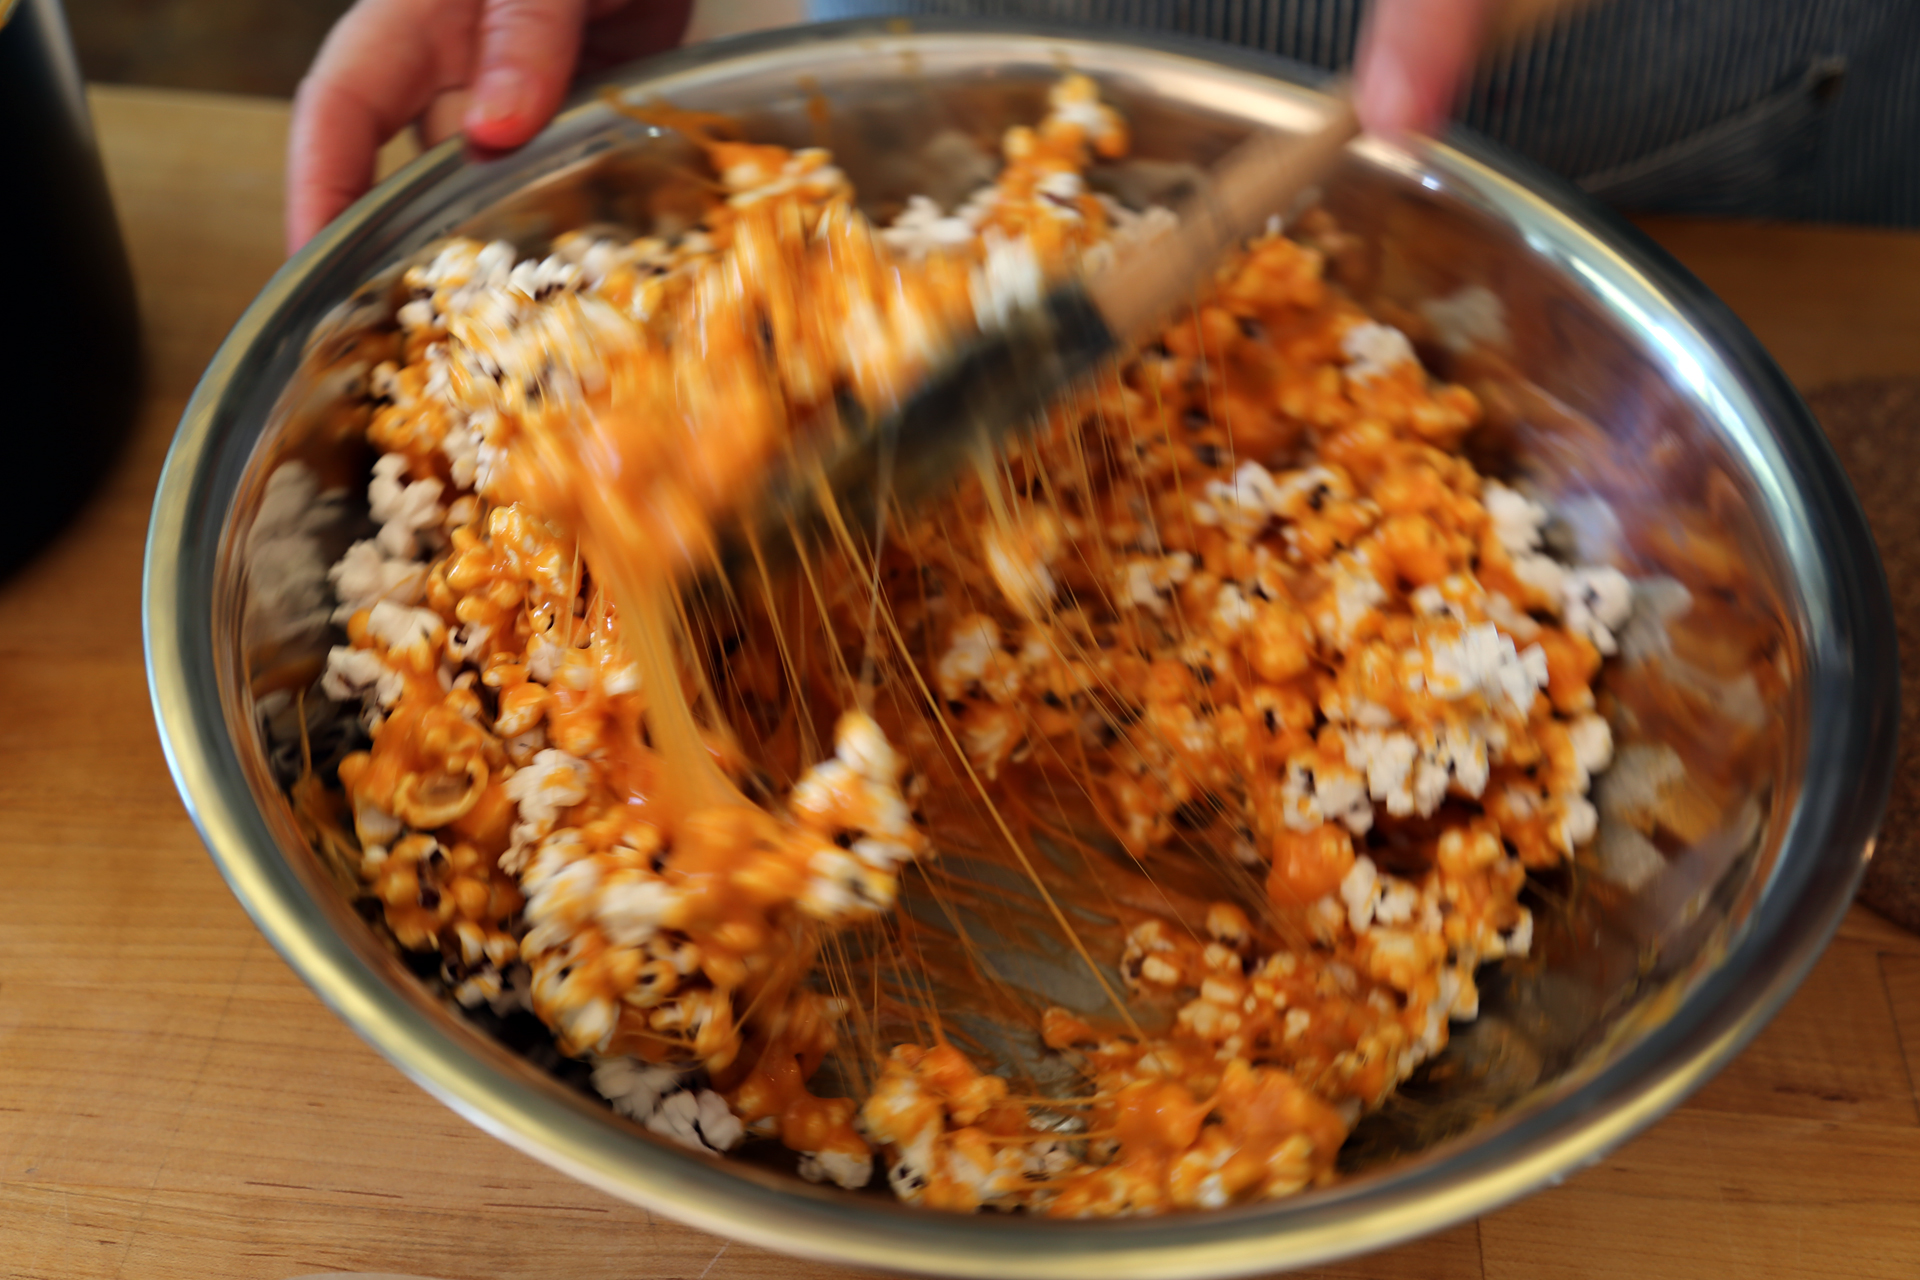 Pour the caramel mixture over the popcorn and stir to completely coat the popcorn.